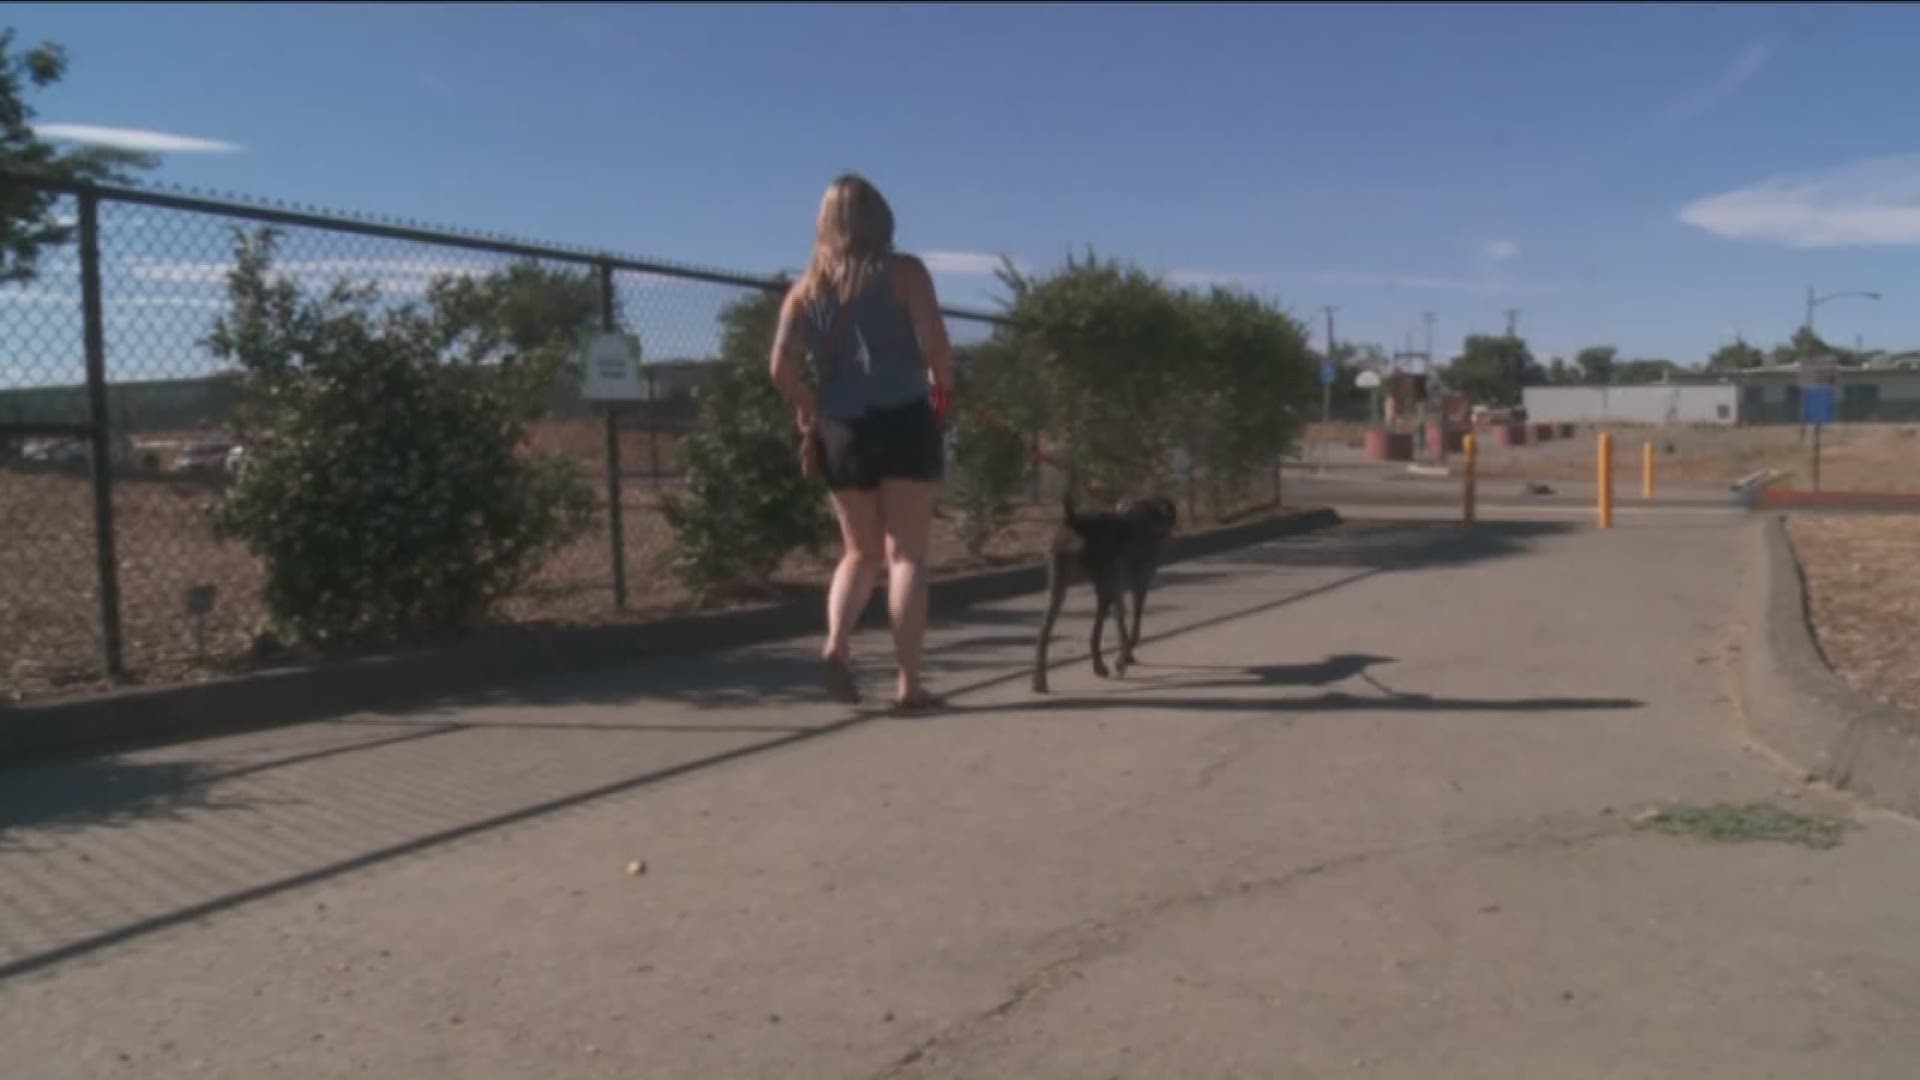 As the heat wave rolls in, pet owners beware: Your pup can easily get burned.